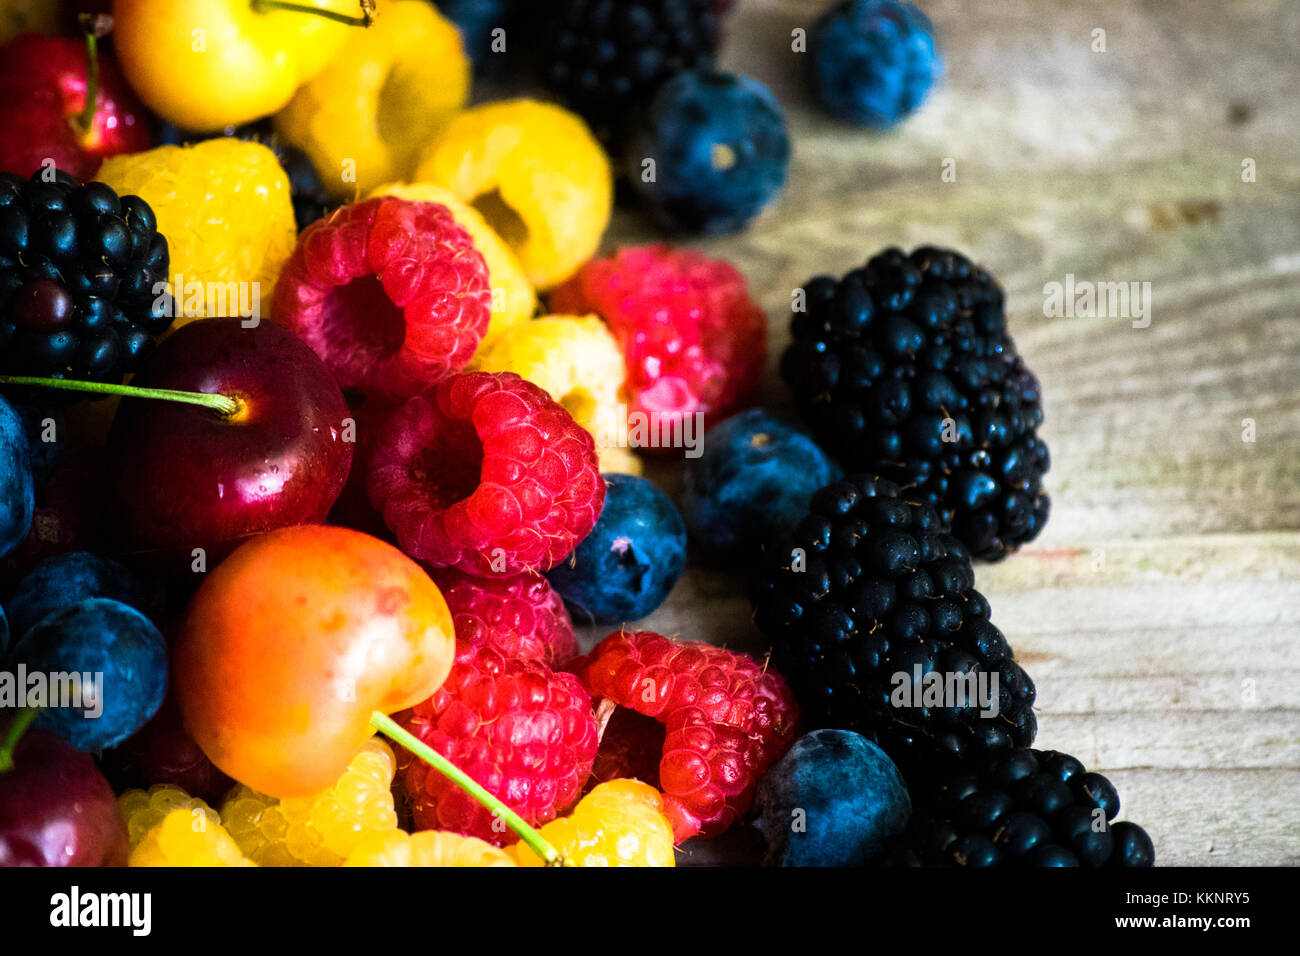 Mix of berries on wooden background Stock Photo